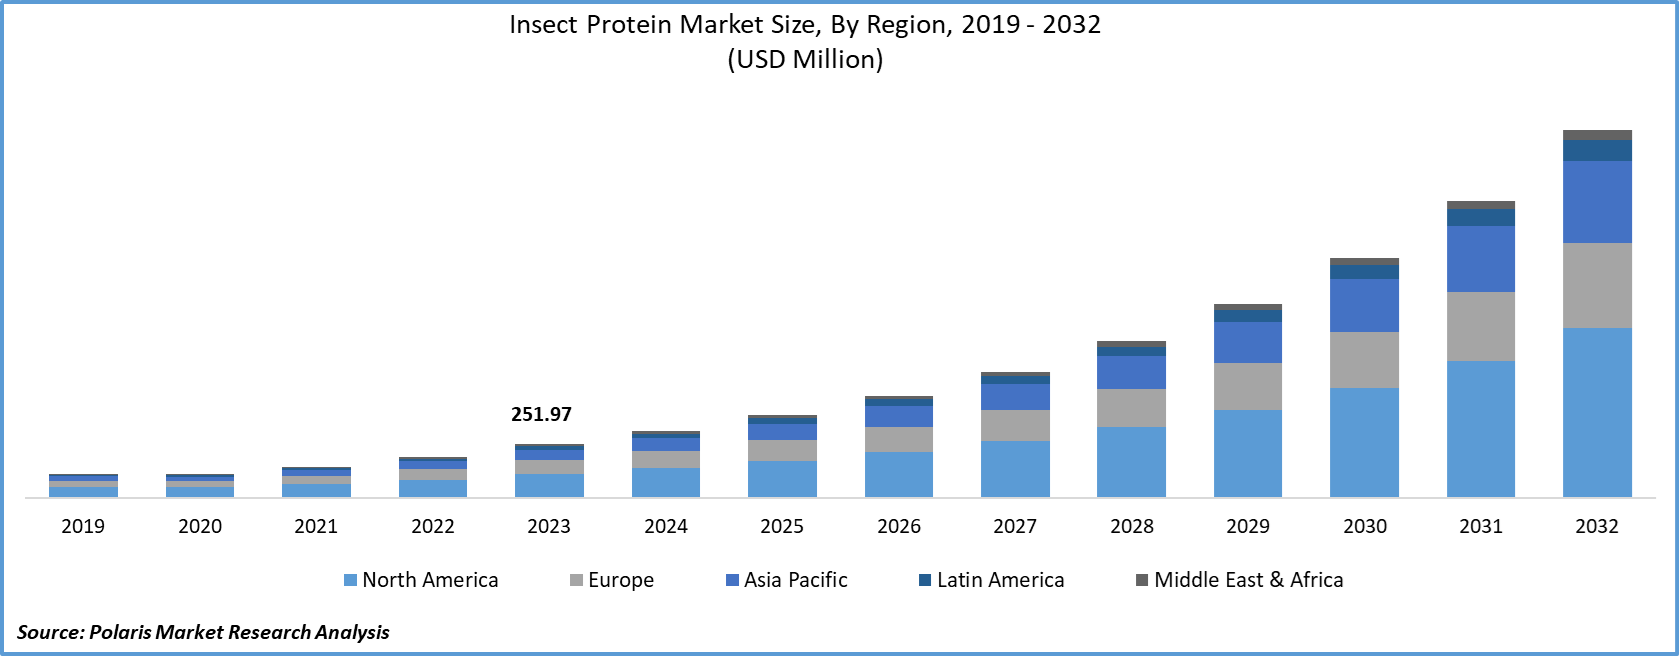 Insect Protein Market size